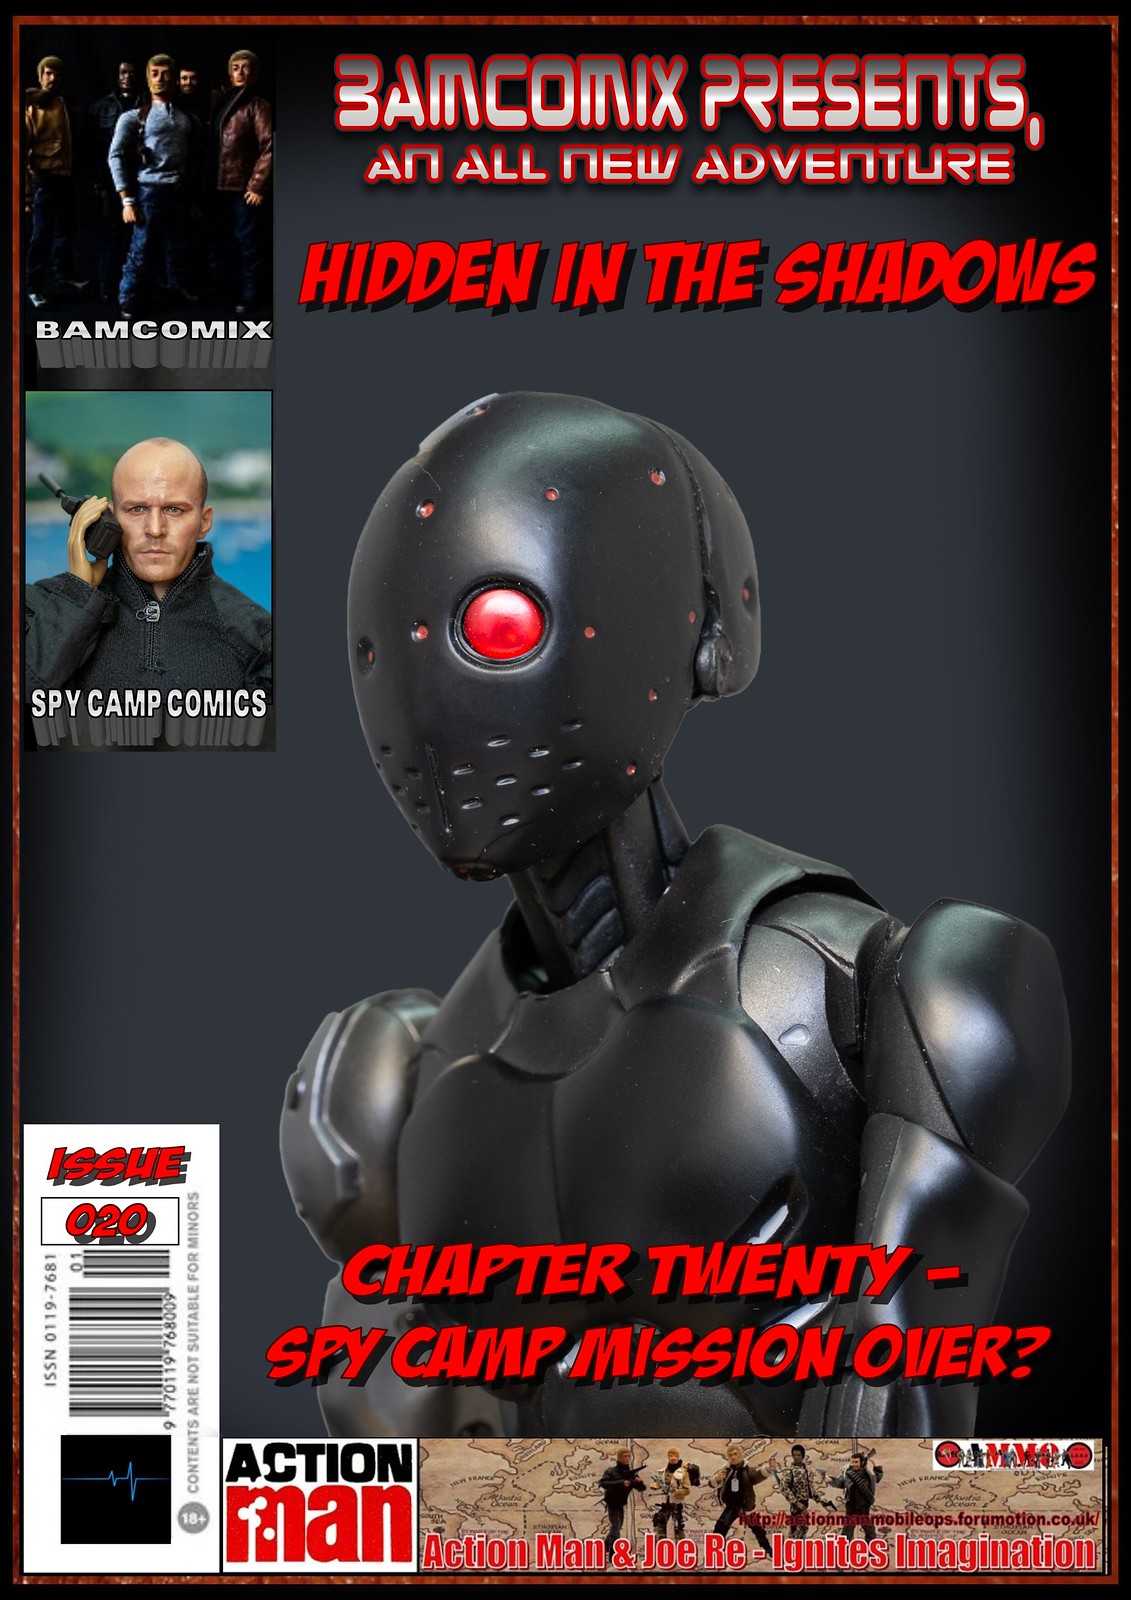 BAMCOMIX Presents - Hidden In The Shadows - Chapter Twenty - Spy Camp Mission Over? 51012063181_4d423584e6_h